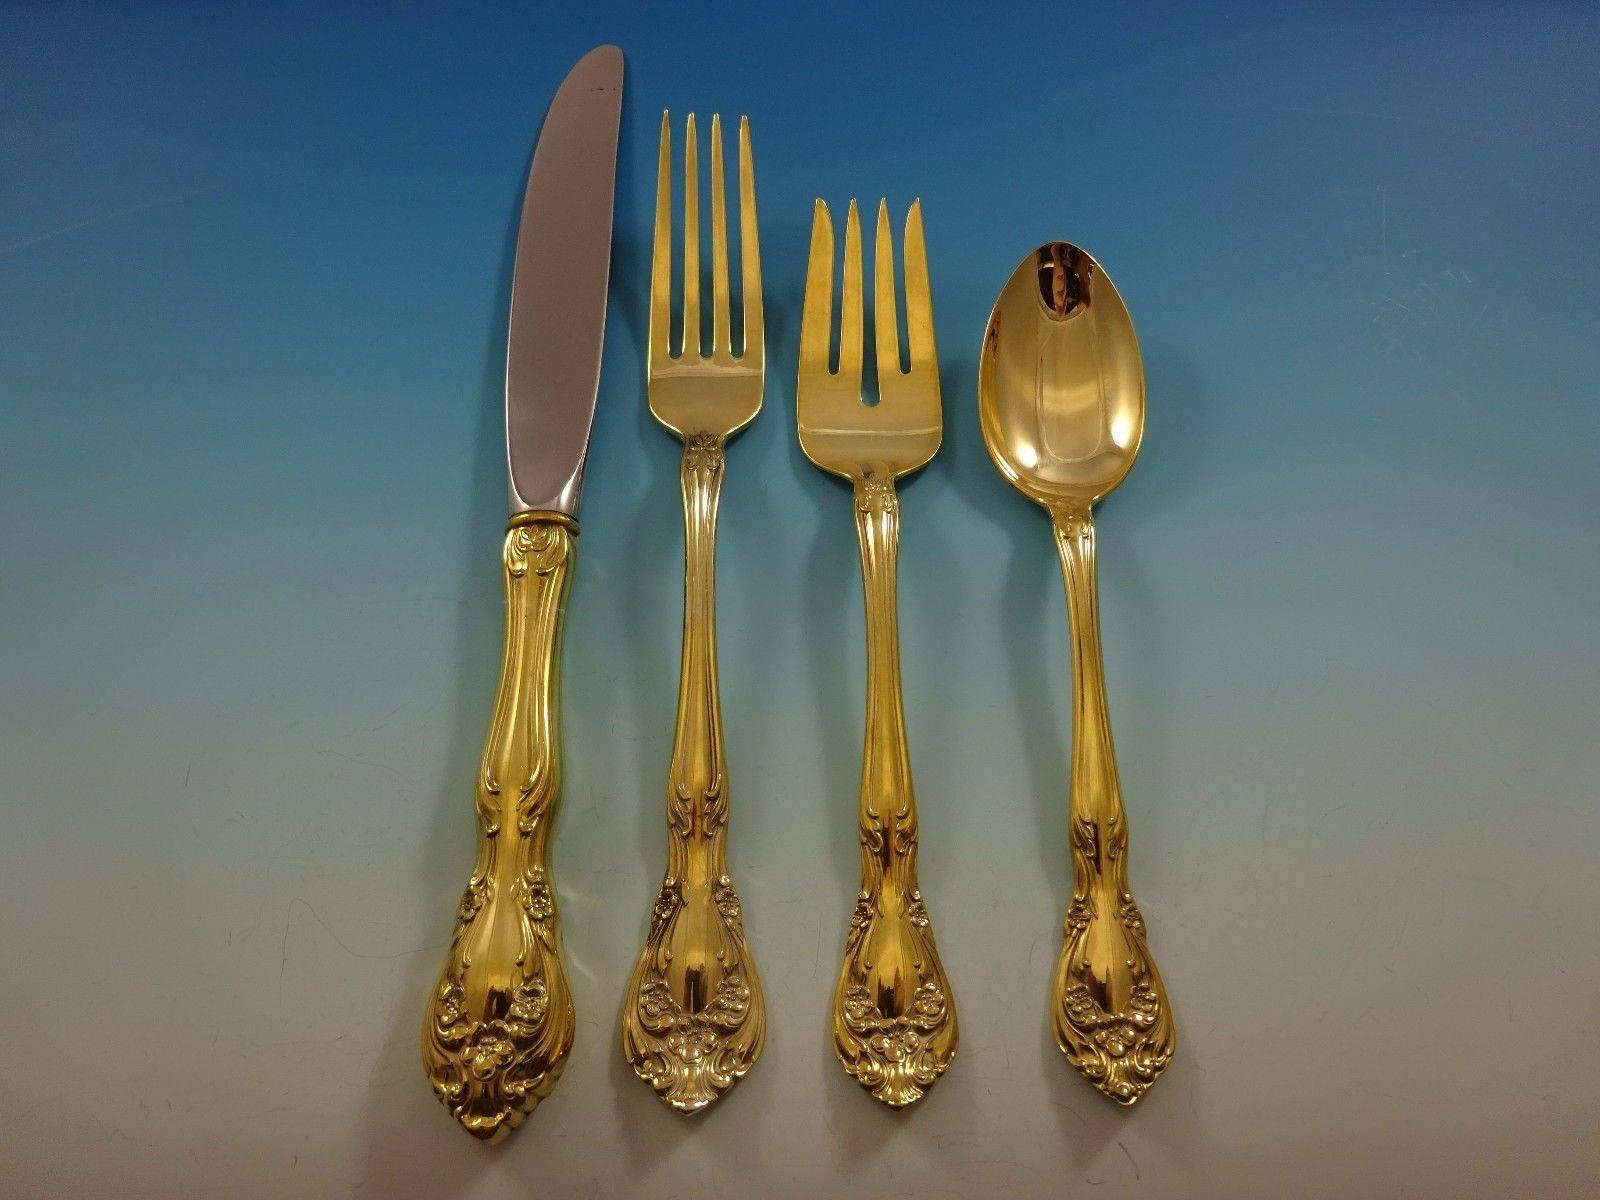 Chateau rose gold by Alvin sterling silver flatware set - 24 pieces. Gold flatware is on trend and makes a bold statement on your table. This set is vermeil (completely gold-washed) and includes: 

six knives, 8 7/8